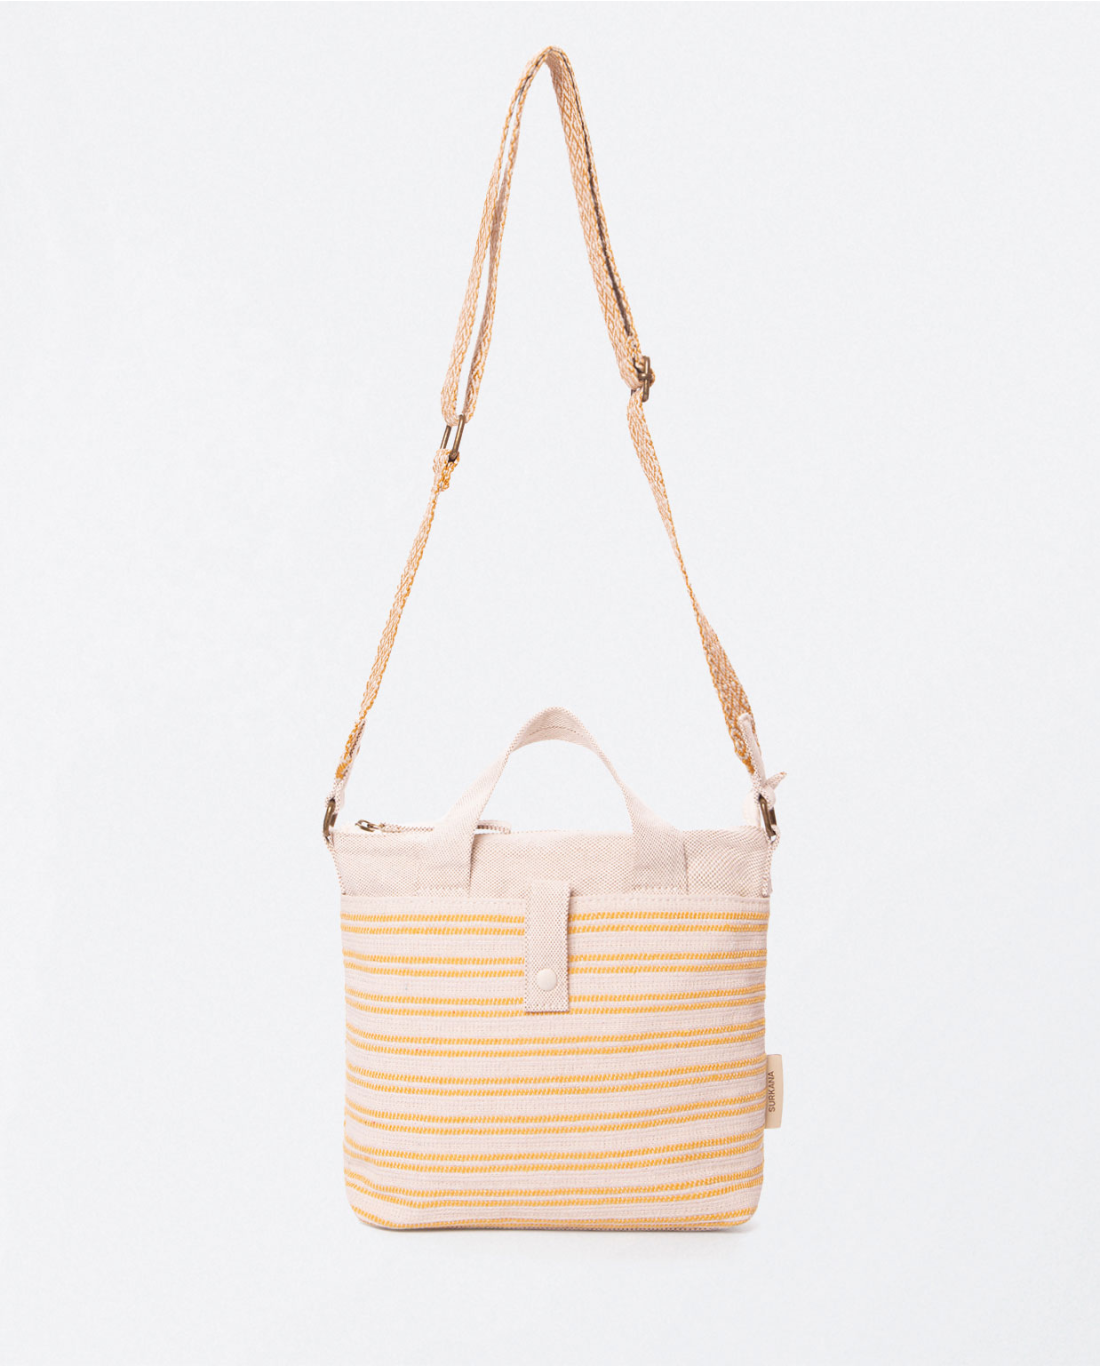 Jacquard shoulder bag with handle. Stripes Yellow Color Yellow